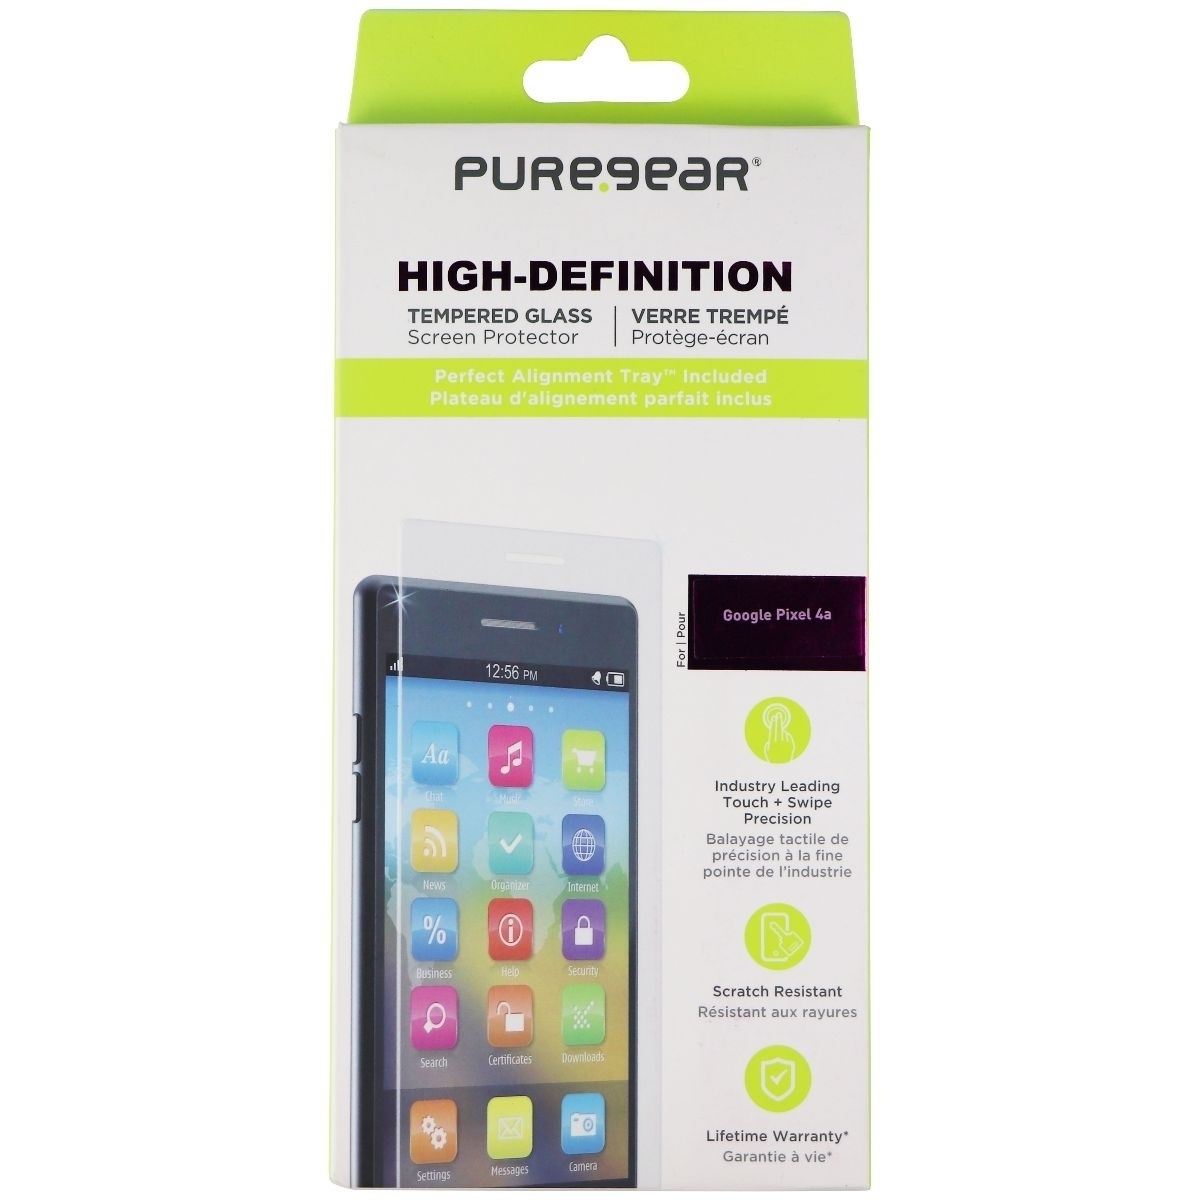 PureGear High-Definition Tempered Glass Screen Protector For Google Pixel 4a